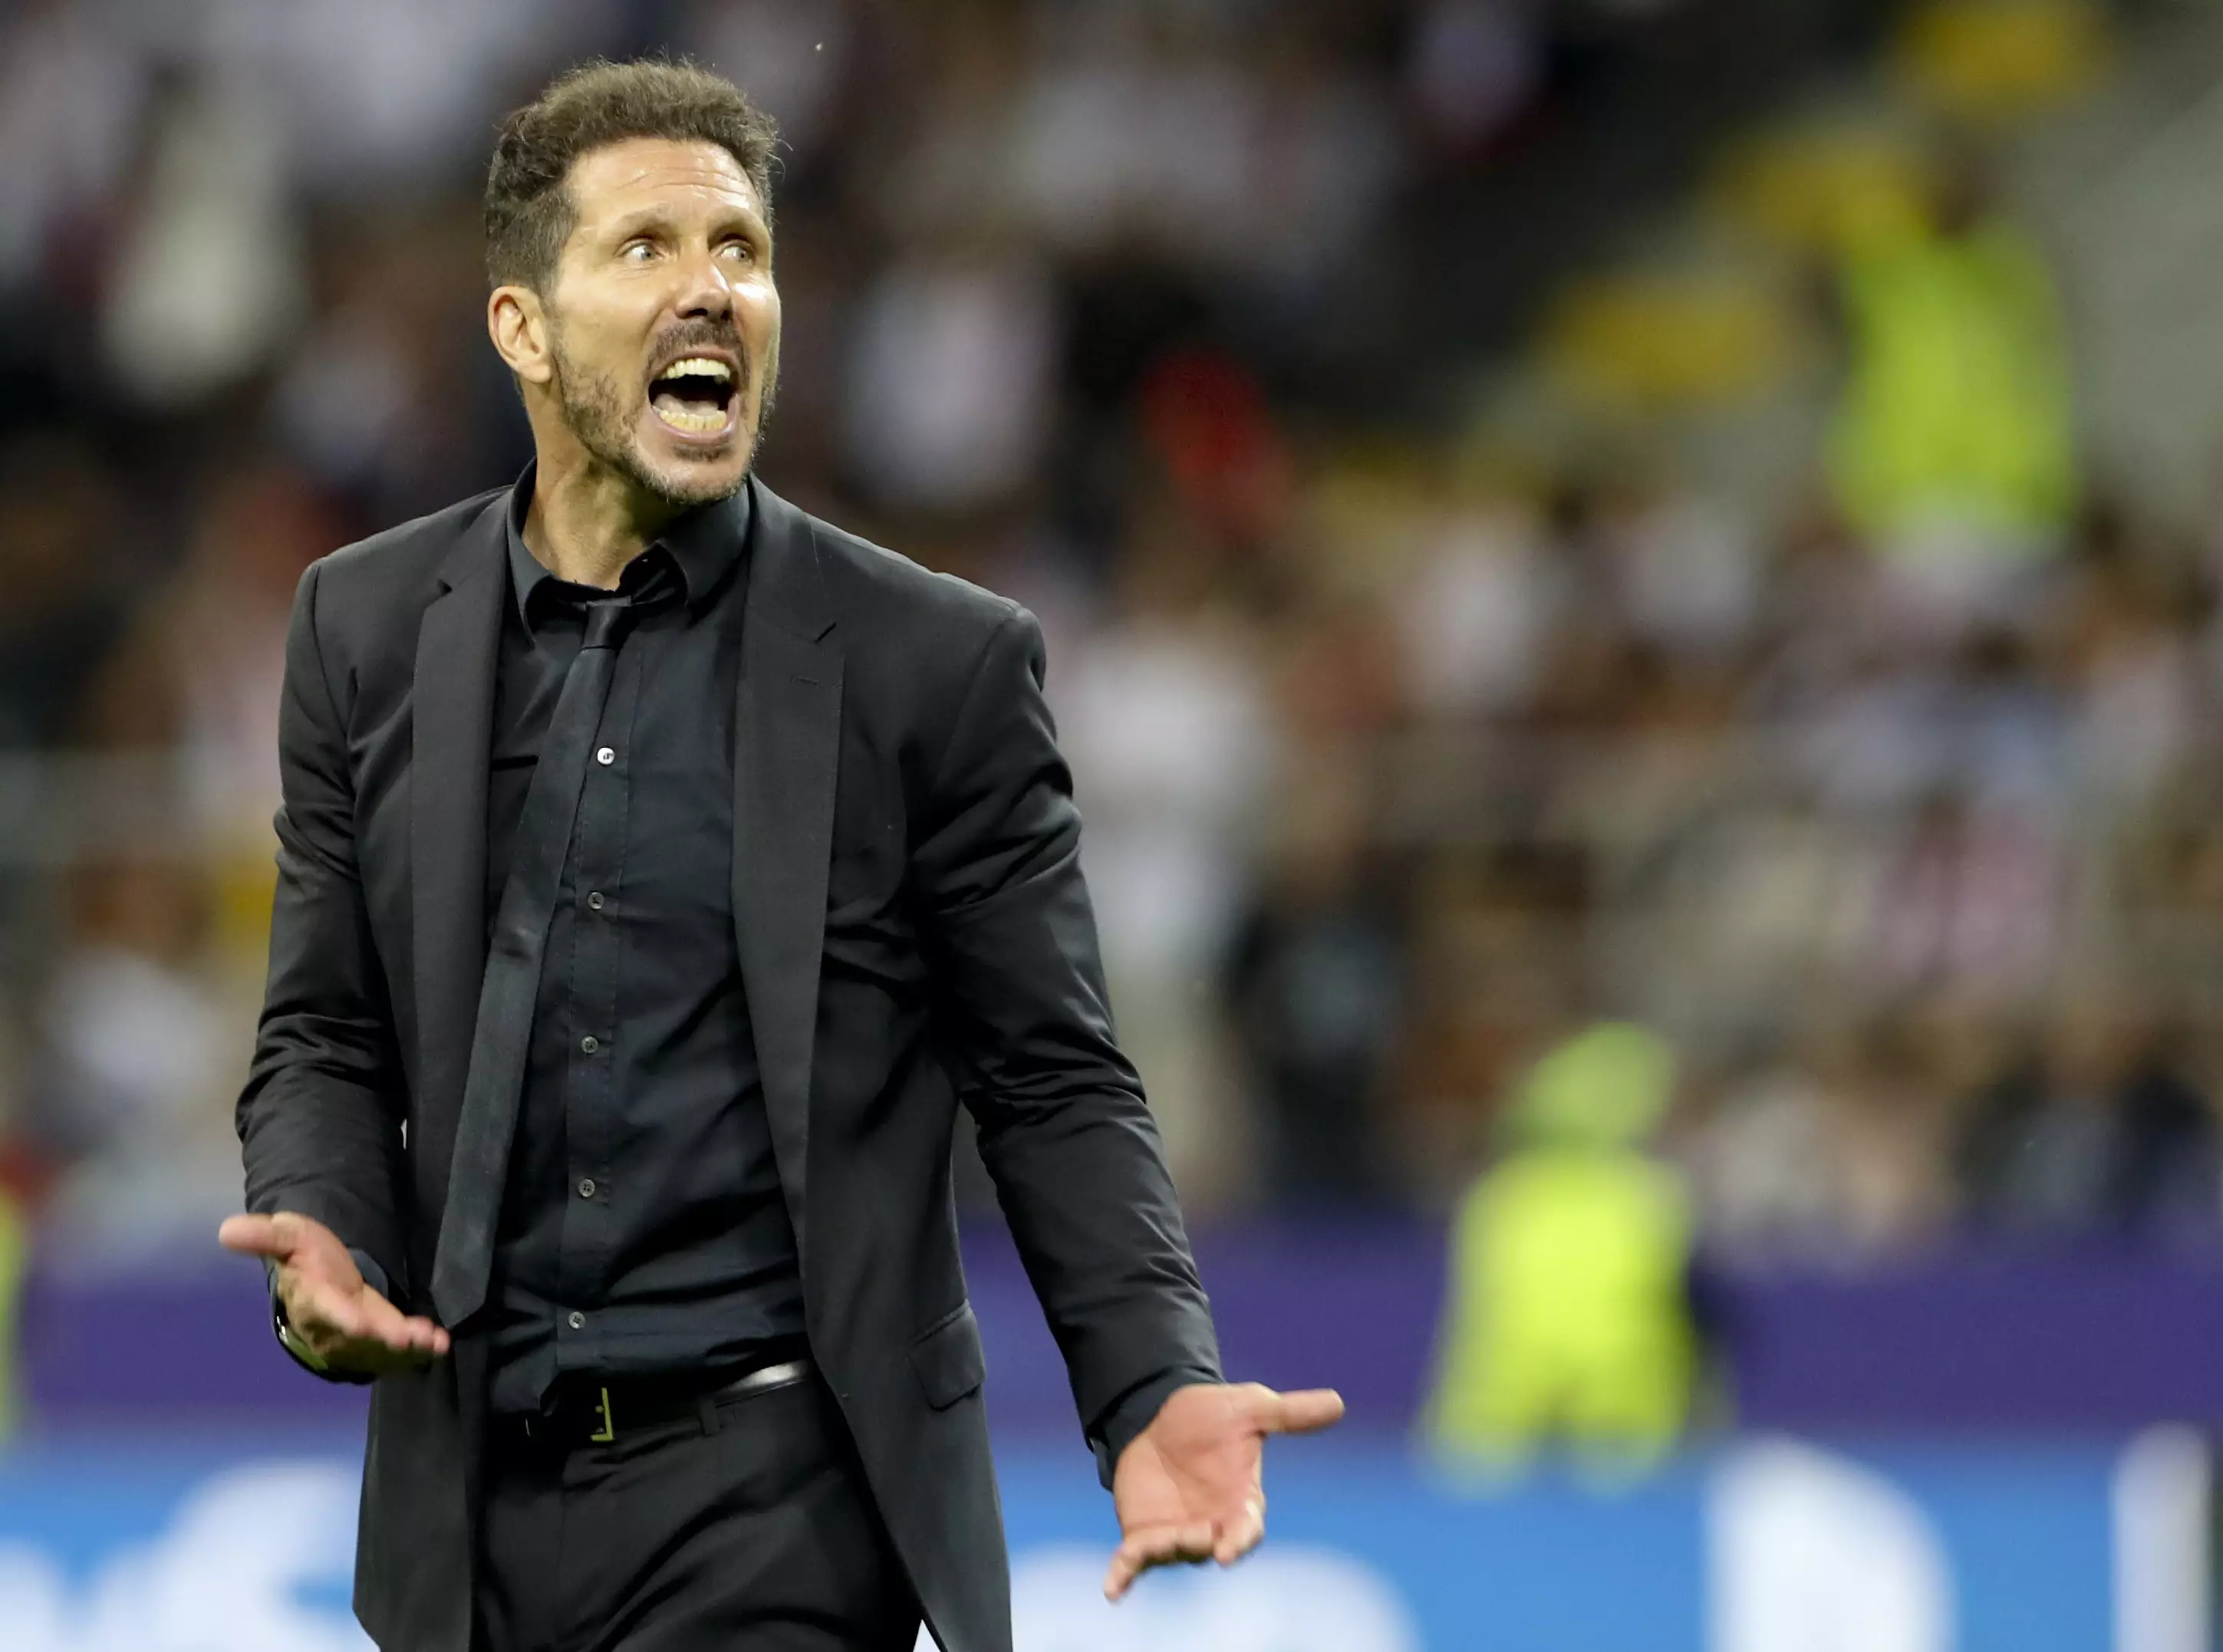 Simeone holds two recent wins over Klopp. Image: PA Images